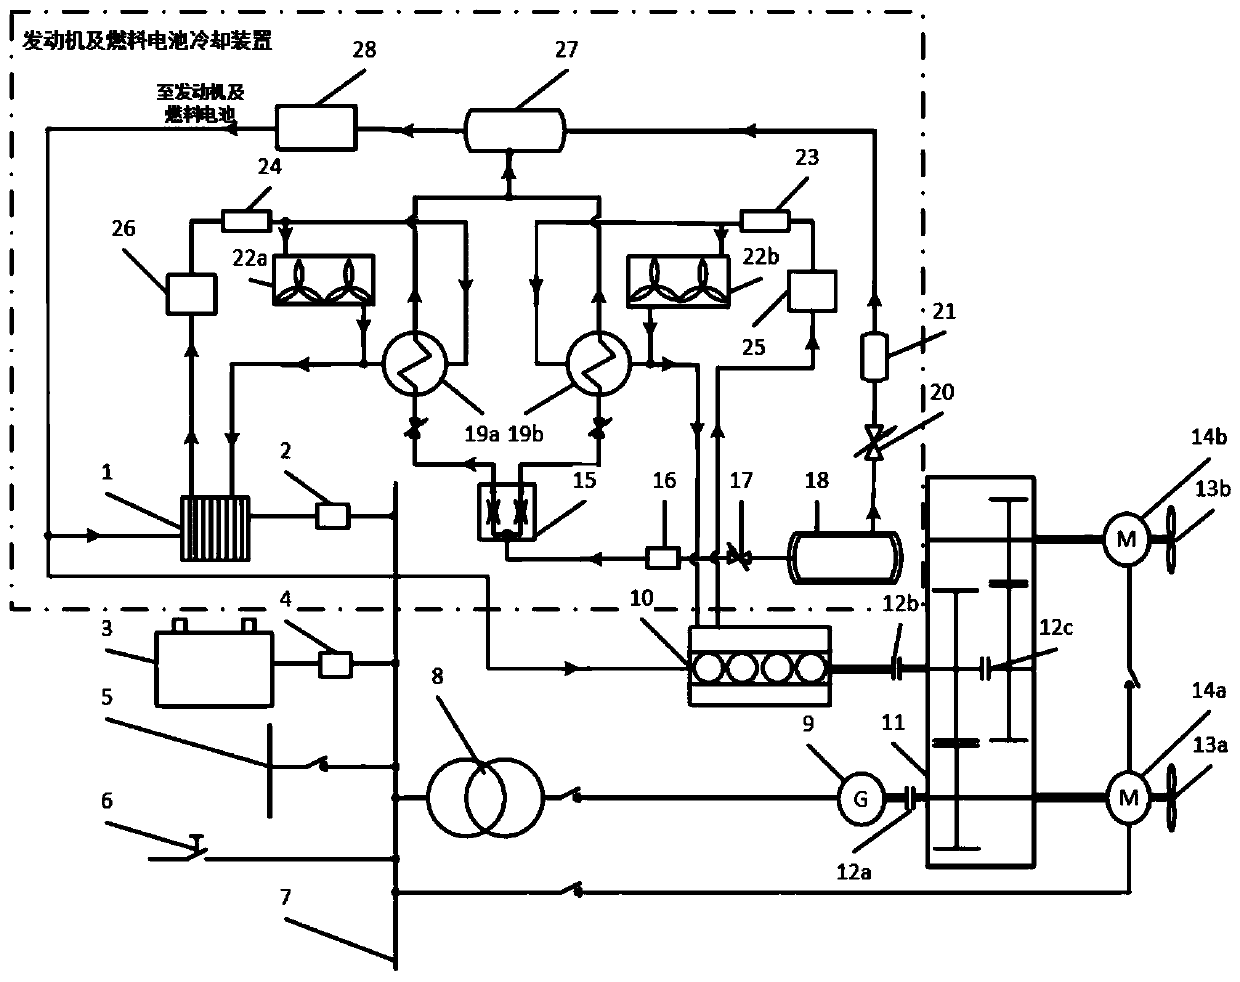 Gas-electric hybrid type ship hybrid power system with LNG cooling